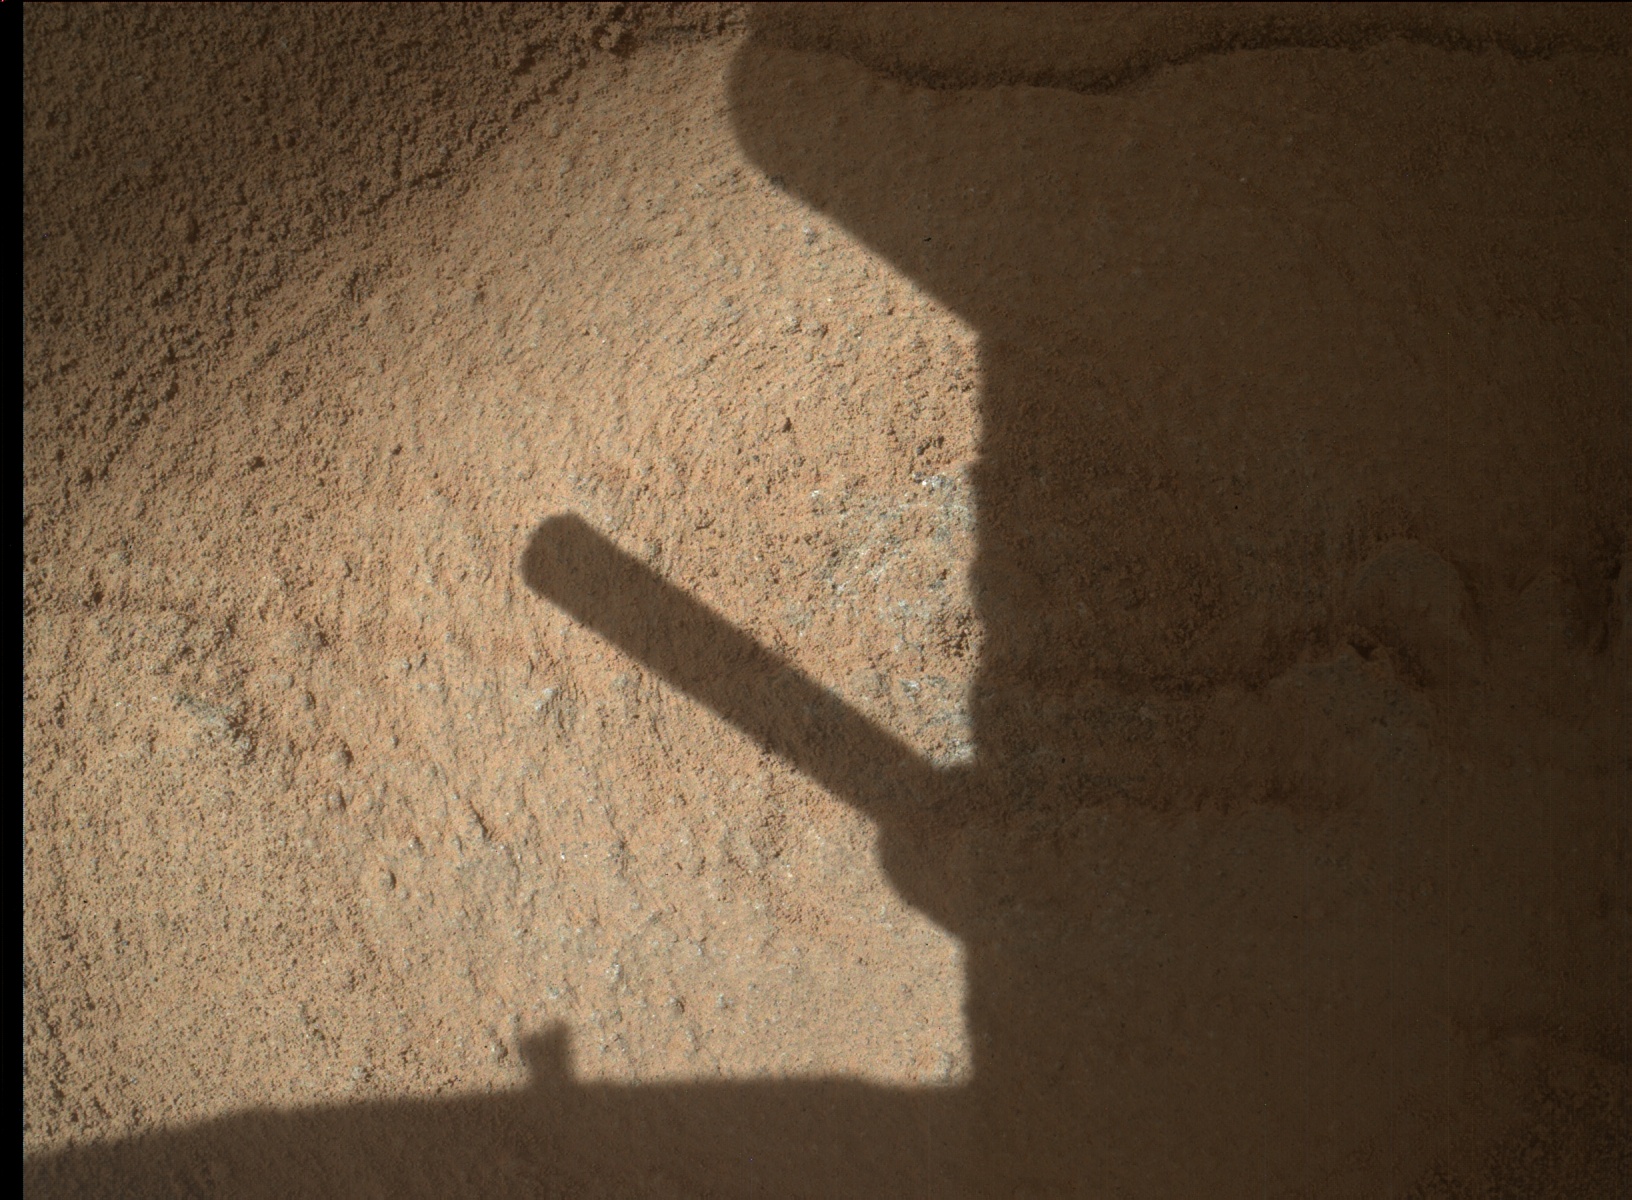 Nasa's Mars rover Curiosity acquired this image using its Mars Hand Lens Imager (MAHLI) on Sol 3812